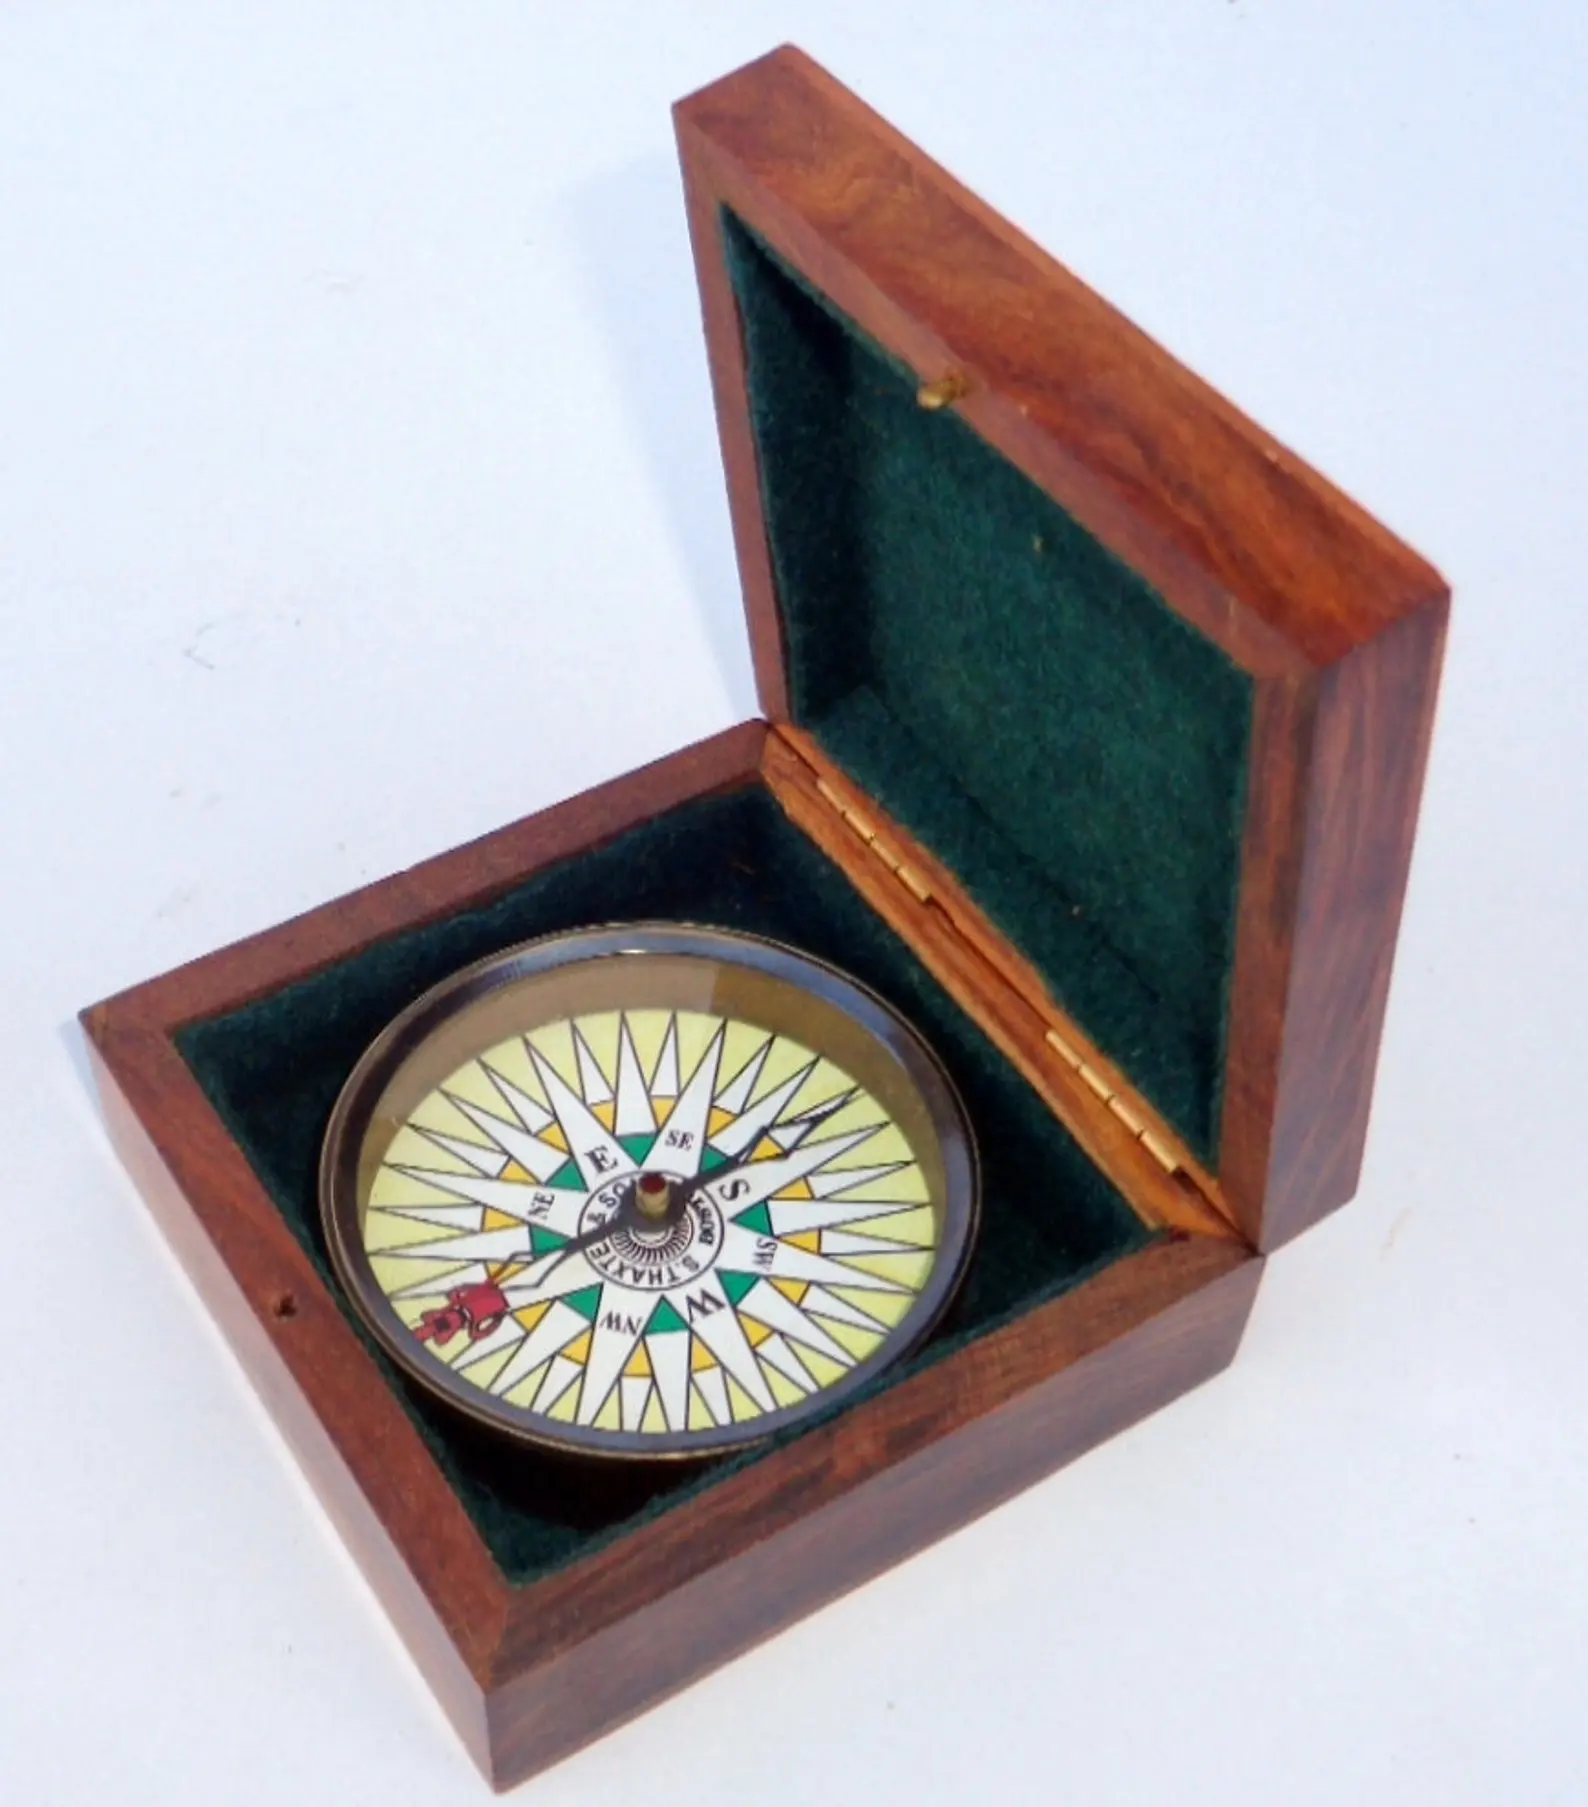 MILITARY COMPASS ENGINEERING COMPASS PRISMATIC HANDMADE VINTAGE NAUTICAL STYLE 